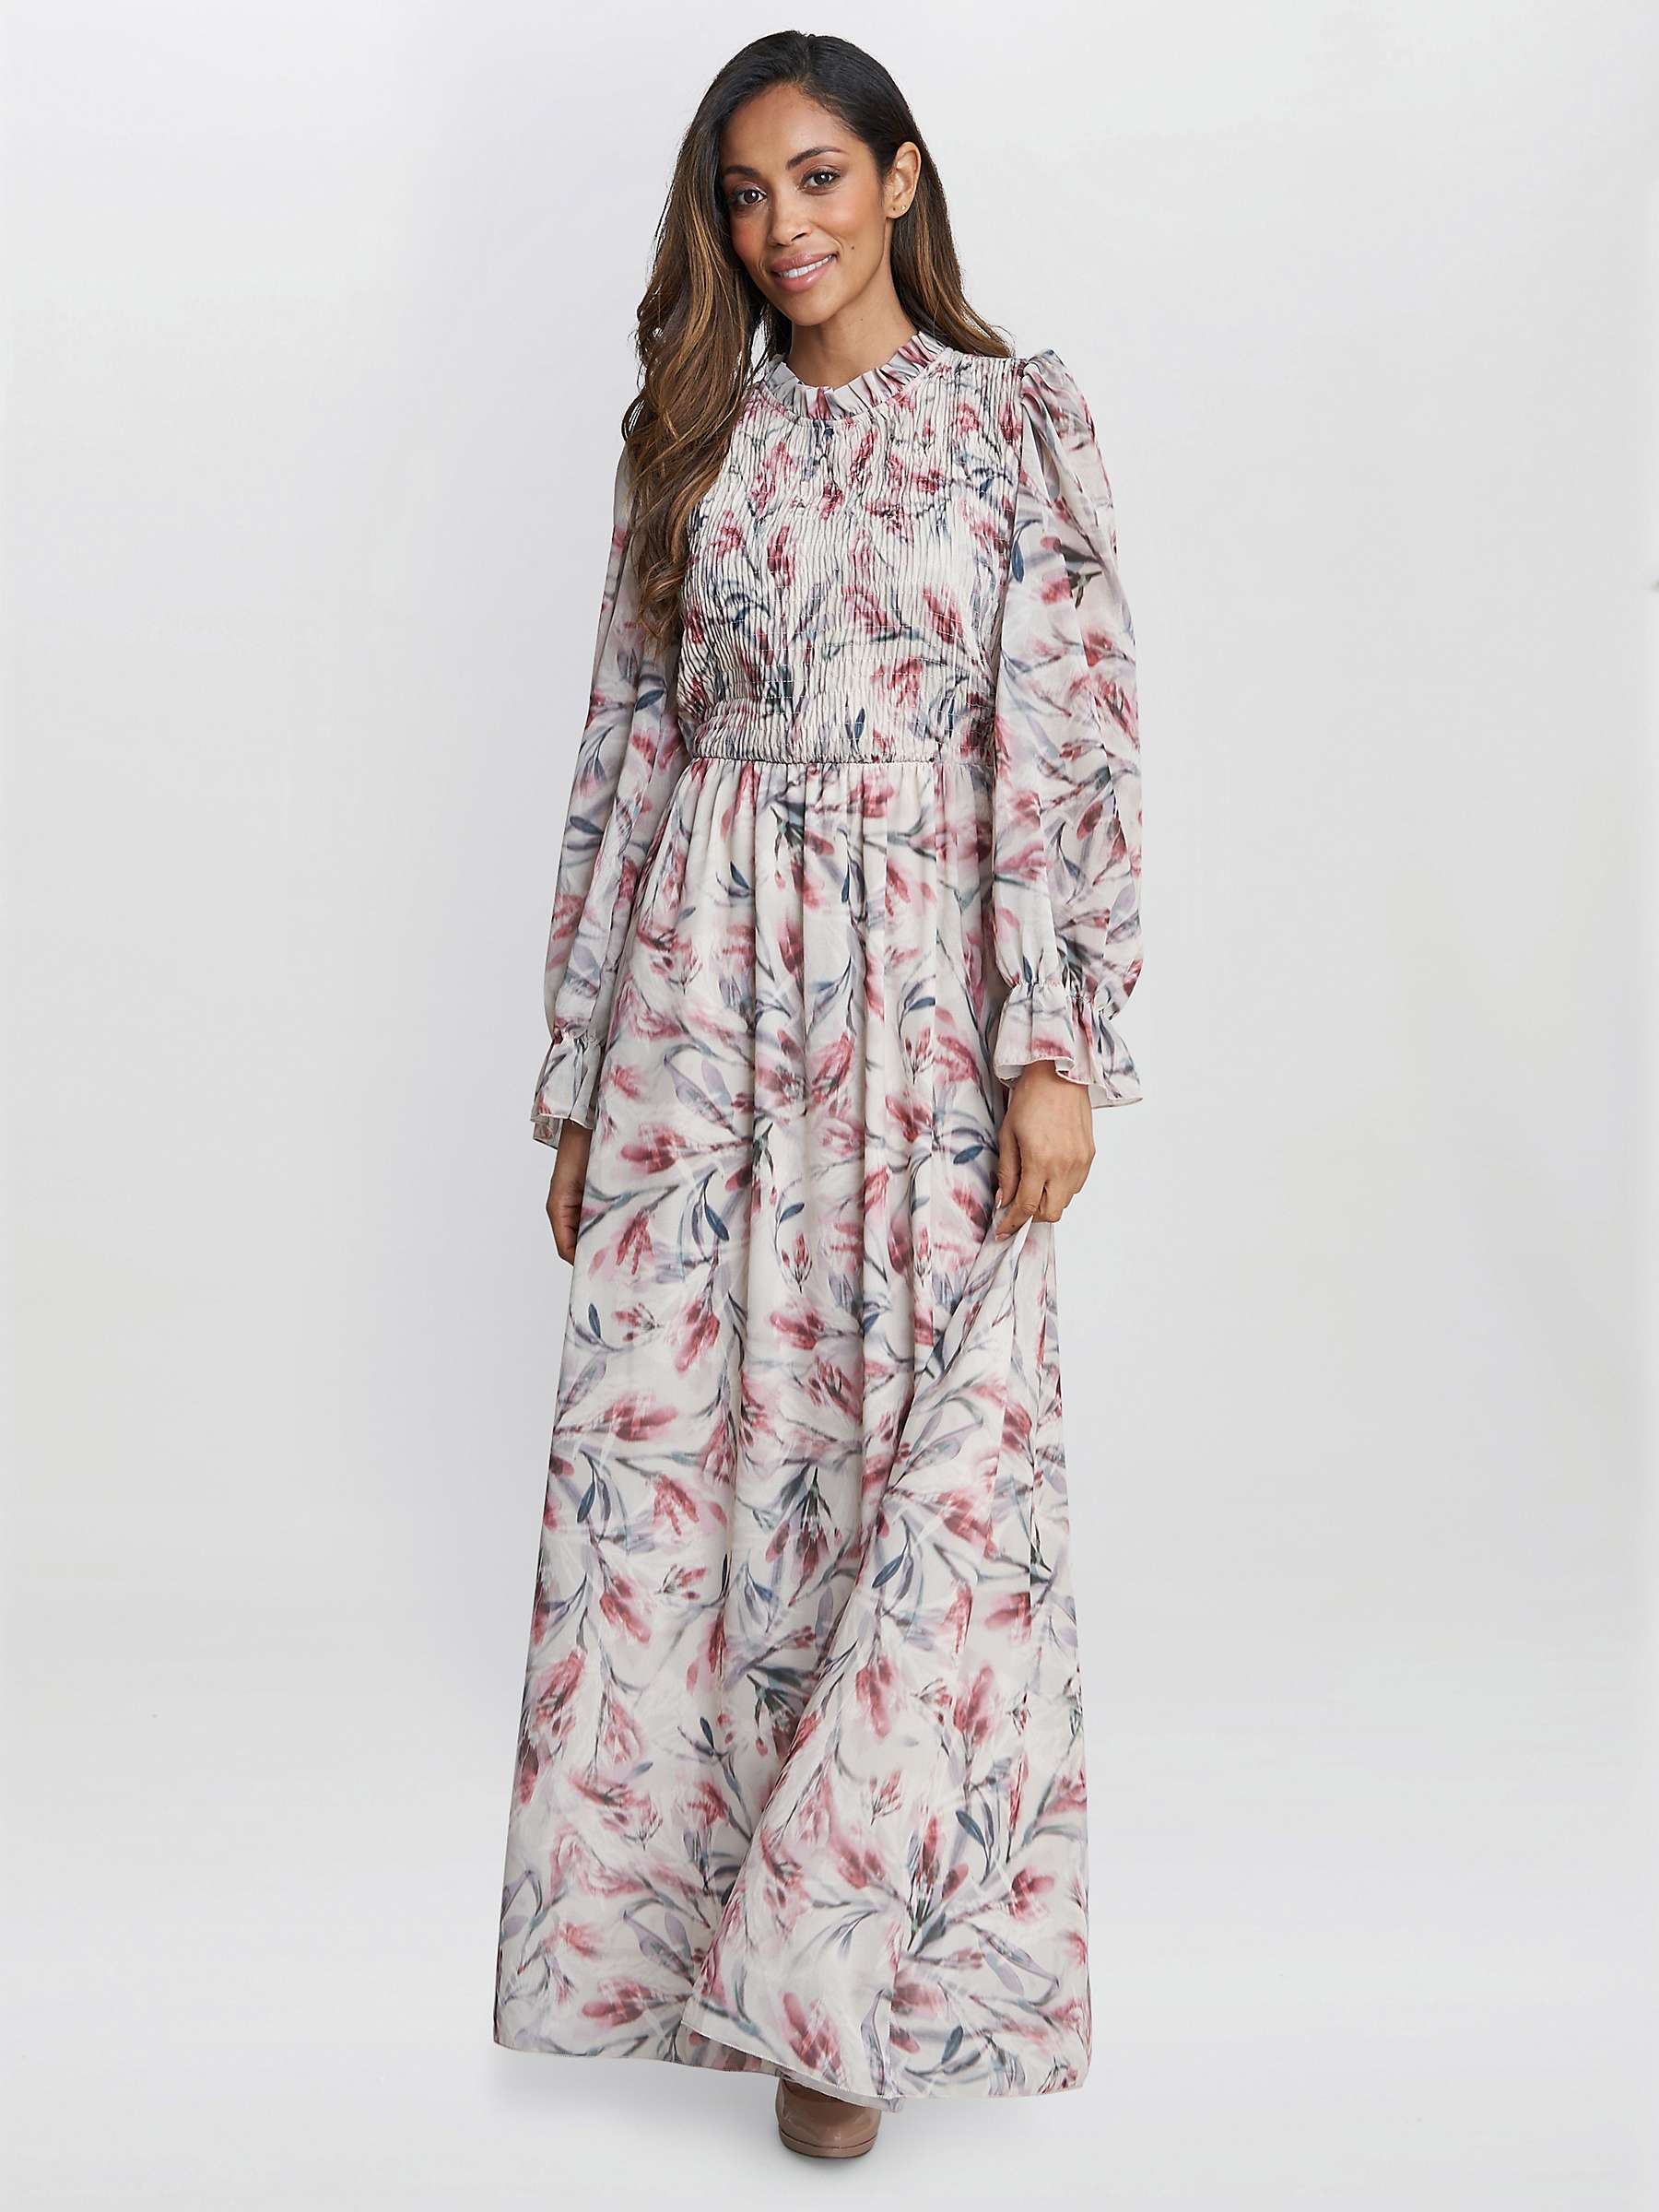 Buy Gina Bacconi Thea Floral Maxi Dress, White/Multi Online at johnlewis.com